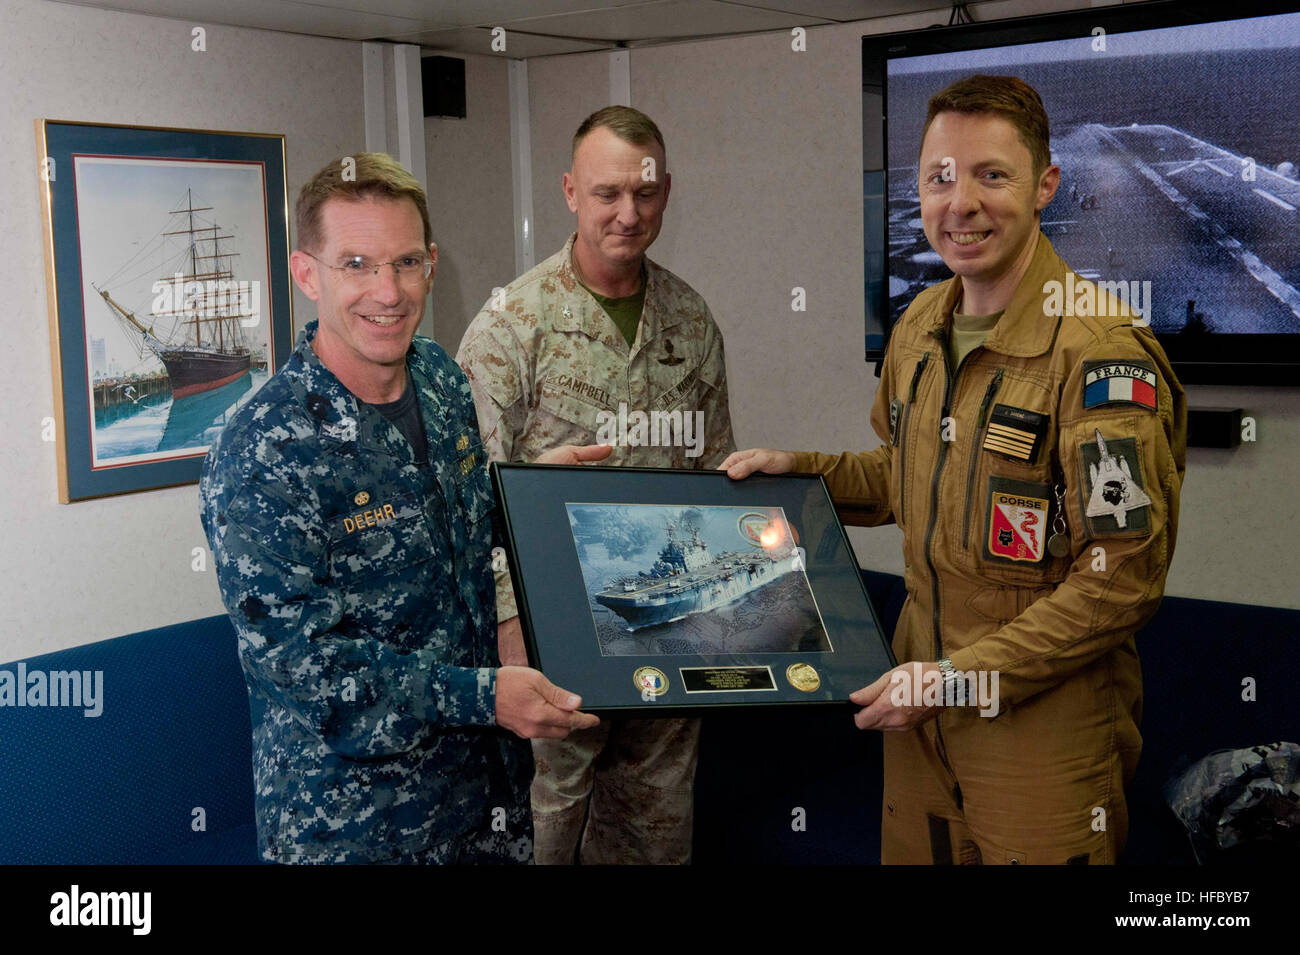 Capt. John D. Deehr, left, commanding officer, amphibious assault ship USS Peleliu (LHA 5), and Col. Scott Campbell, center, commanding officer, 5th Marine Expeditionary Unit, present a gift to Col. Julien Sabéné, commanding officer, French Air Base French, Forces-Djibouti, during his visit. Peleliu is the flagship for the Peleliu Amphibious Ready Group and is deployed with the embarked 15th Marine Expeditionary Unit in support of maritime security operations and theater security cooperation efforts in the U.S. 5th Fleet area of responsibility. (U.S. Navy photo by Mass Communication Specialist Stock Photo